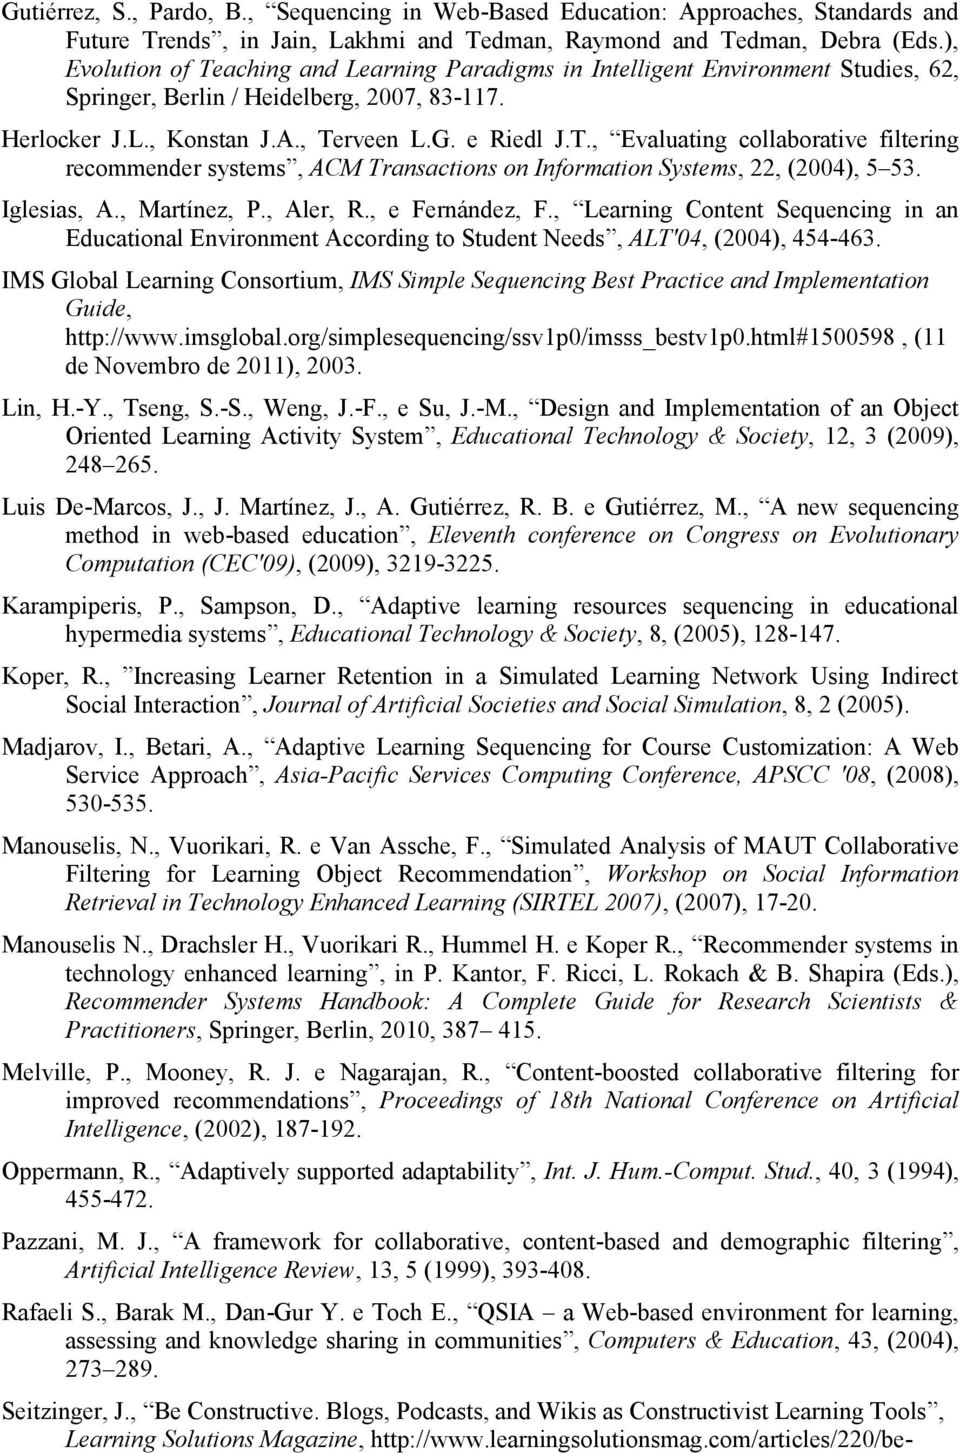 Iglesias, A., Martínez, P., Aler, R., e Fernández, F., Learning Content Sequencing in an Educational Environment According to Student Needs, ALT'04, (2004), 454-463.